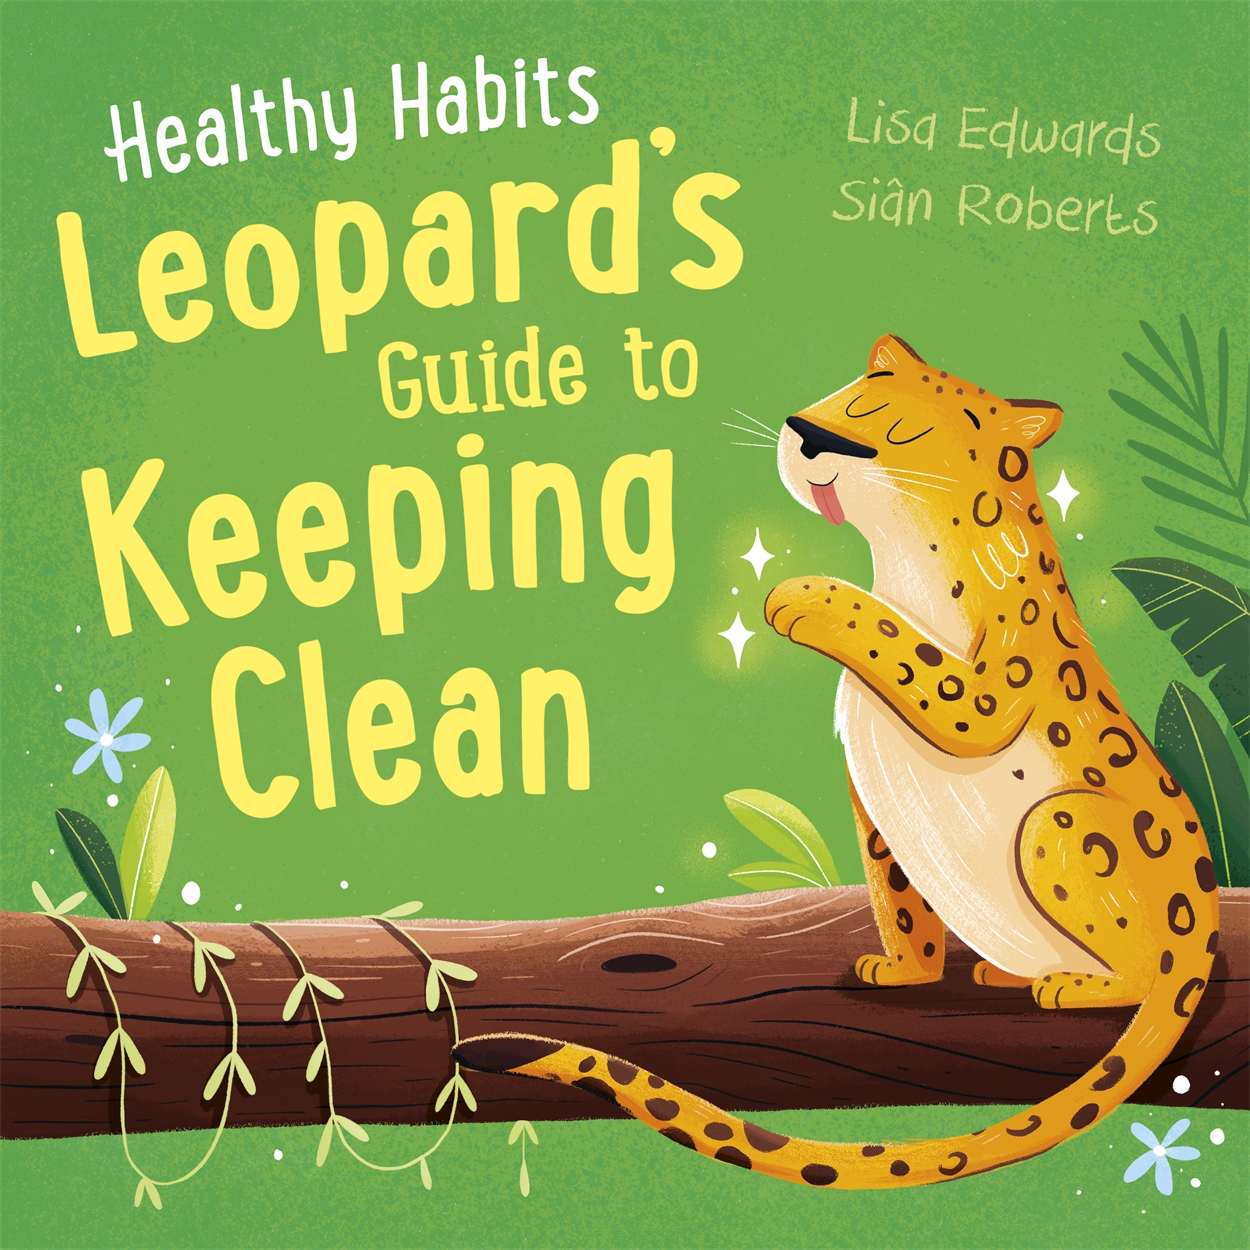 Healthy Habits Leopards Guide To Keeping Clean By Siân Roberts Hachette Uk 3968